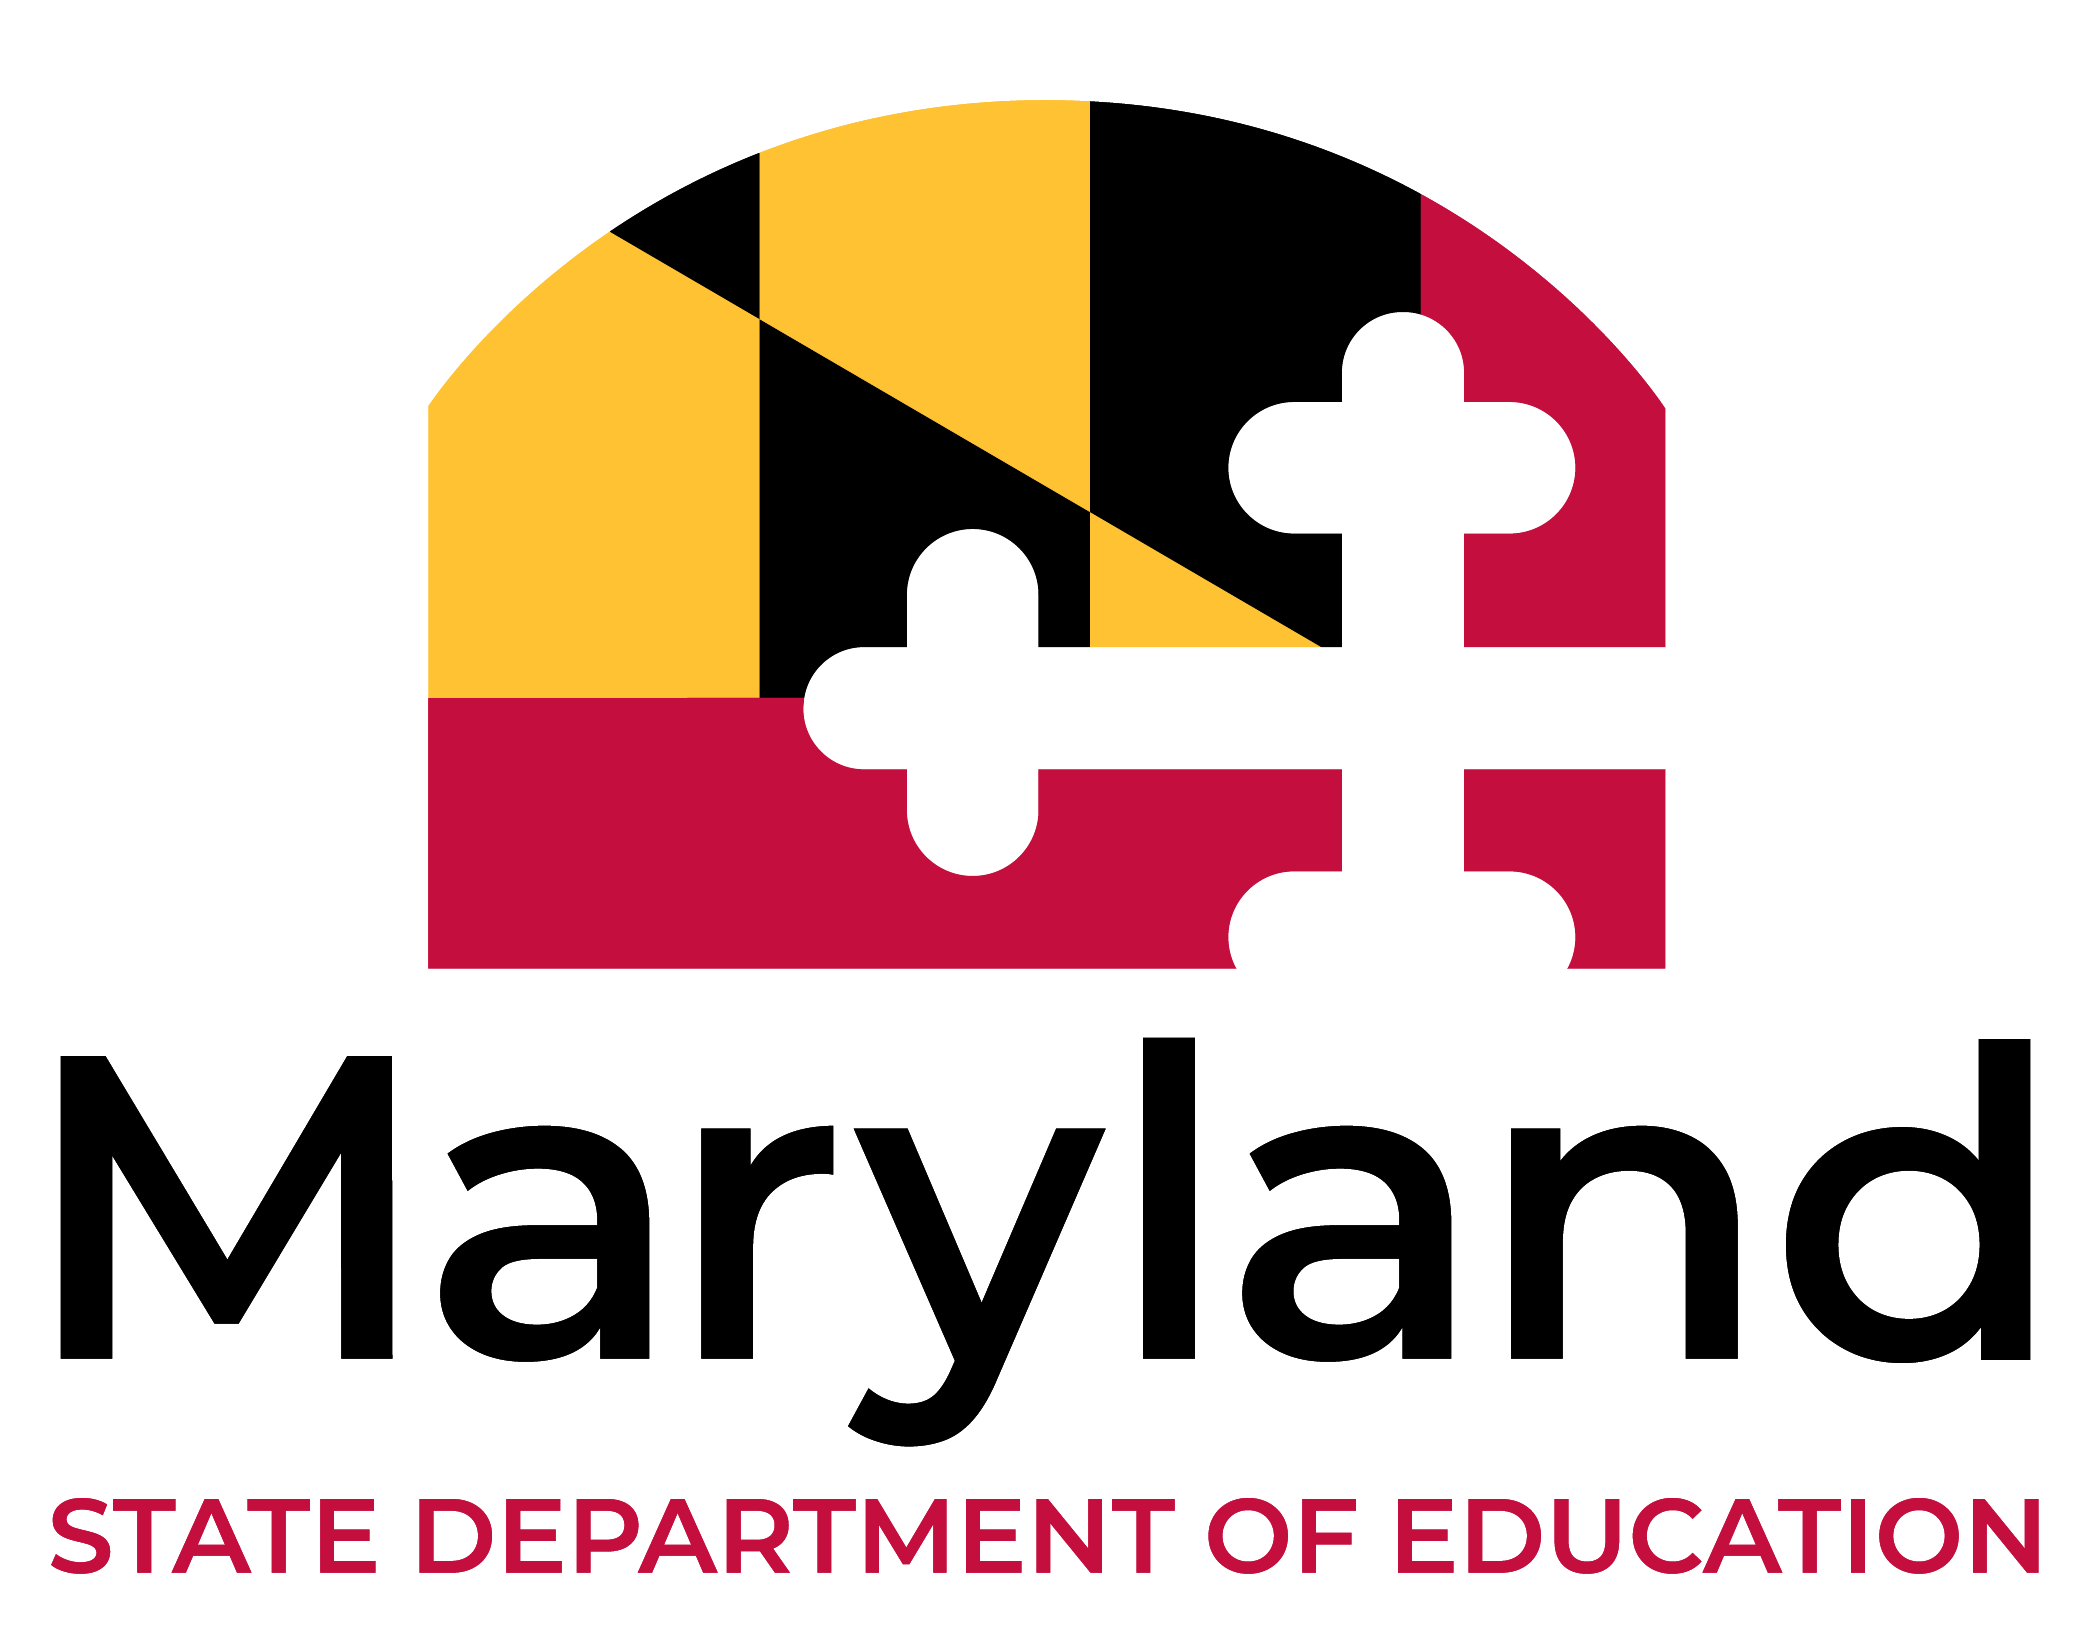 Maryland State Department of Education logo.